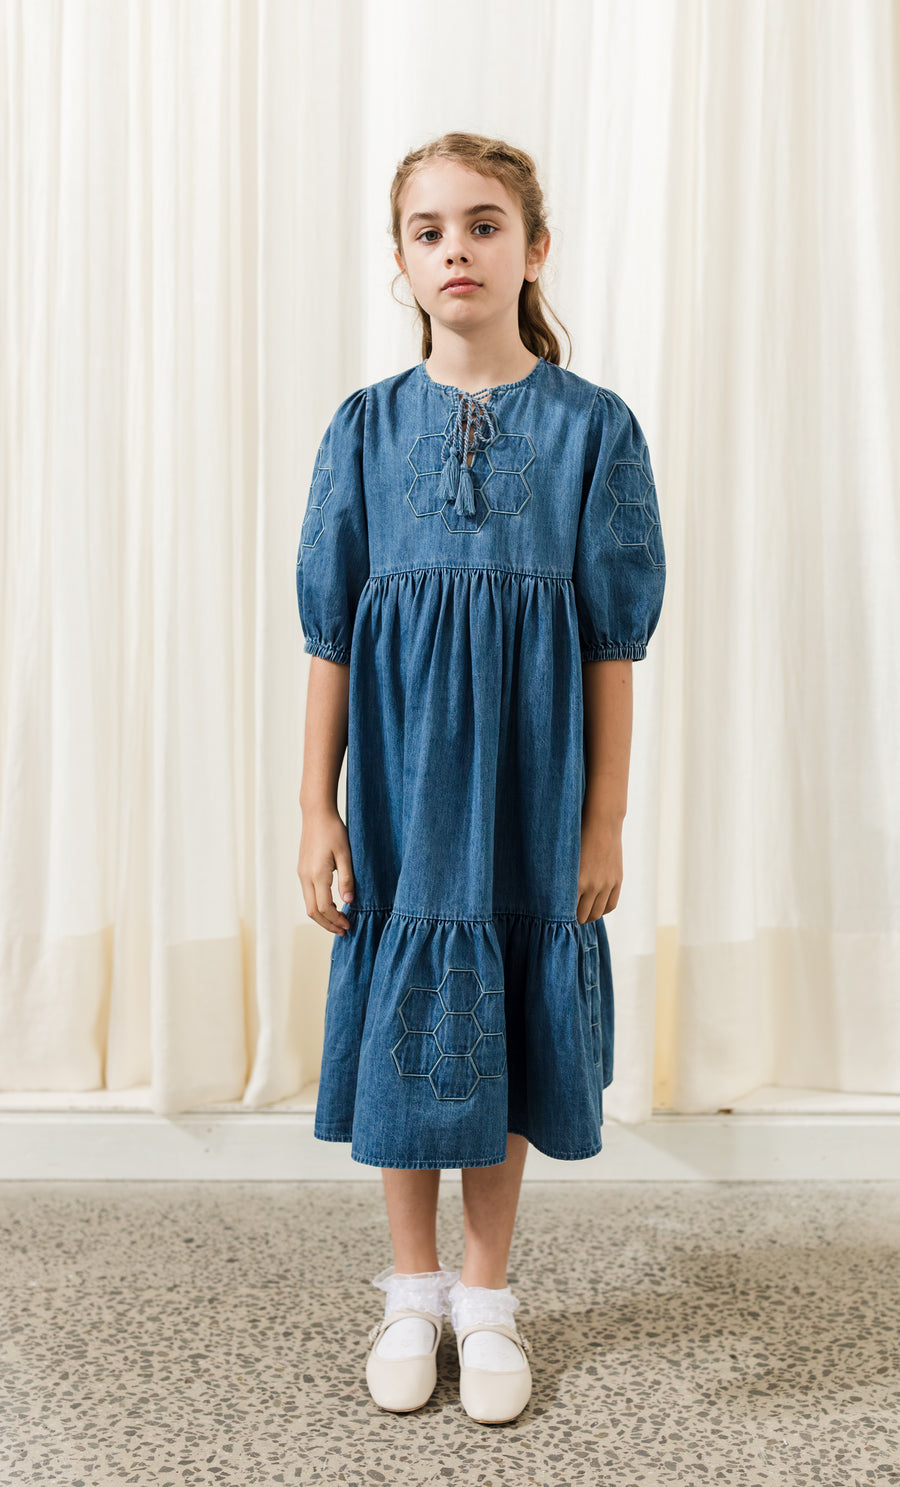 Chambray patchwork dress by Petite Pink